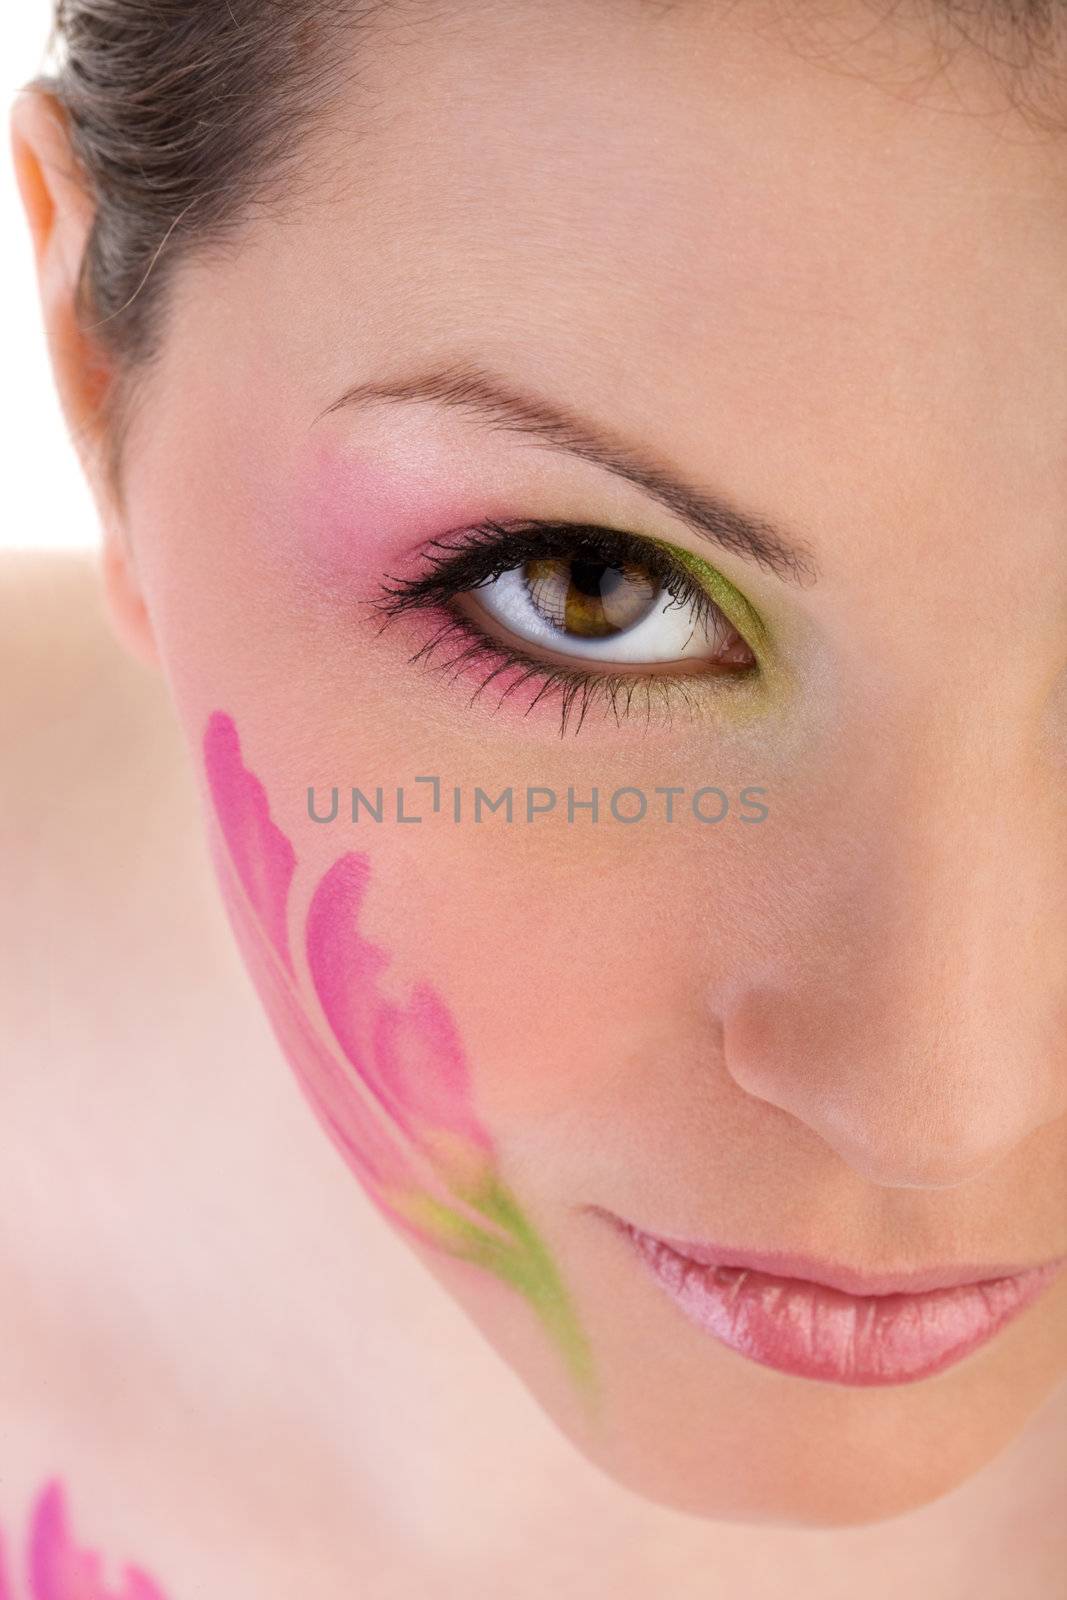 Closeup photo of woman face with painting